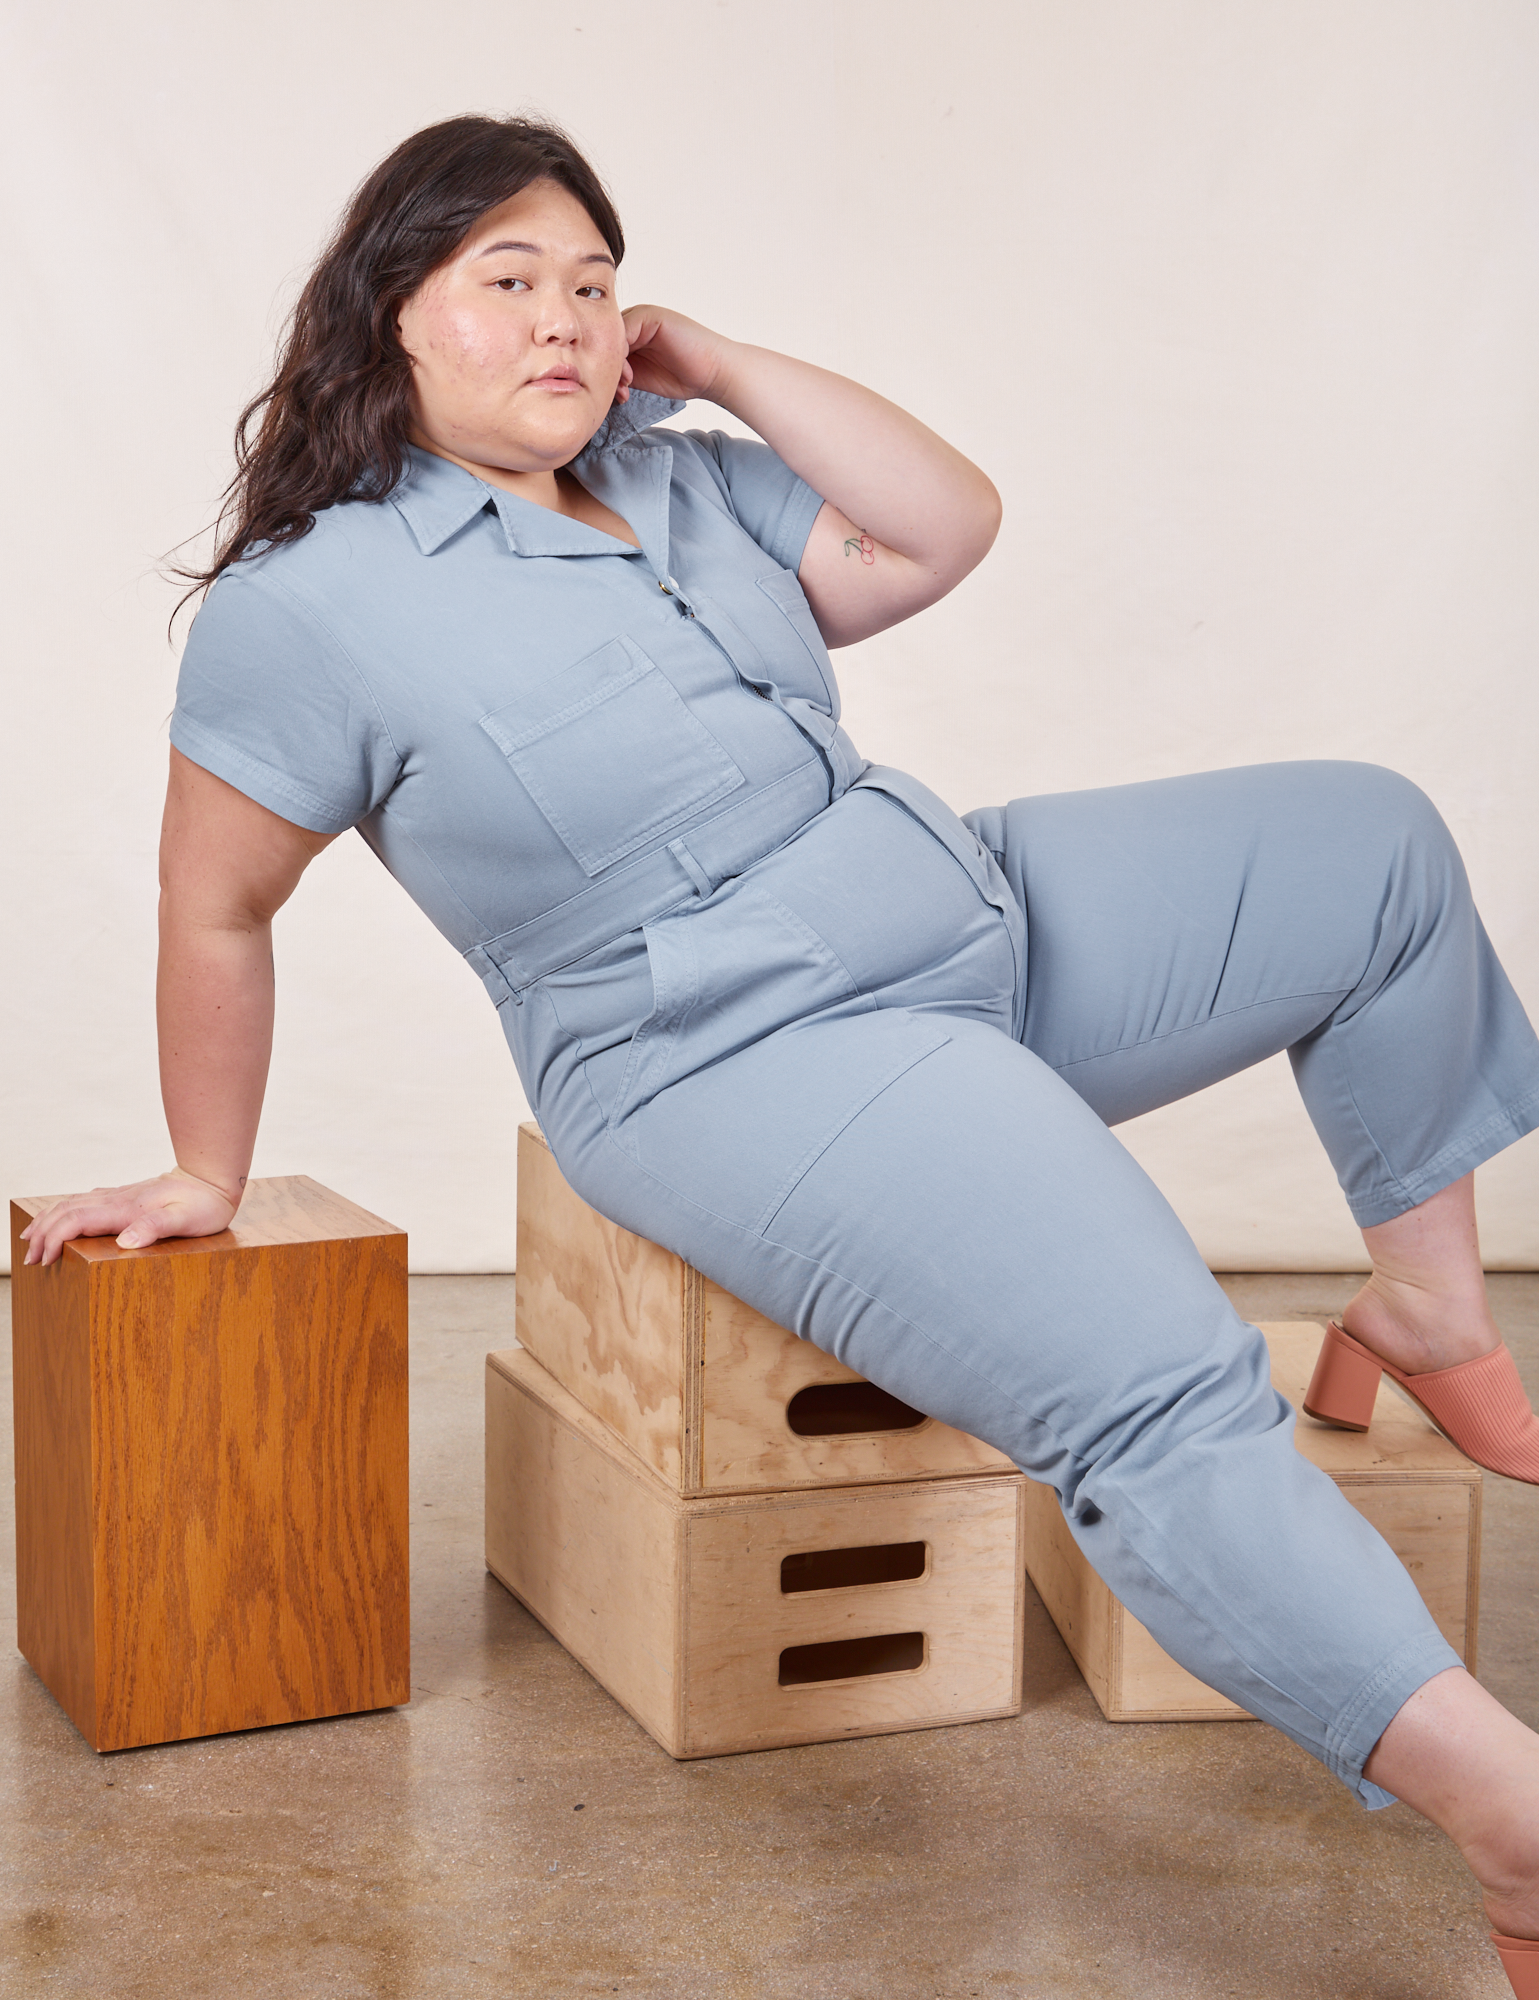 Ashley is wearing Petite Short Sleeve Jumpsuit in Periwinkle and sitting on a stack of wooden crates